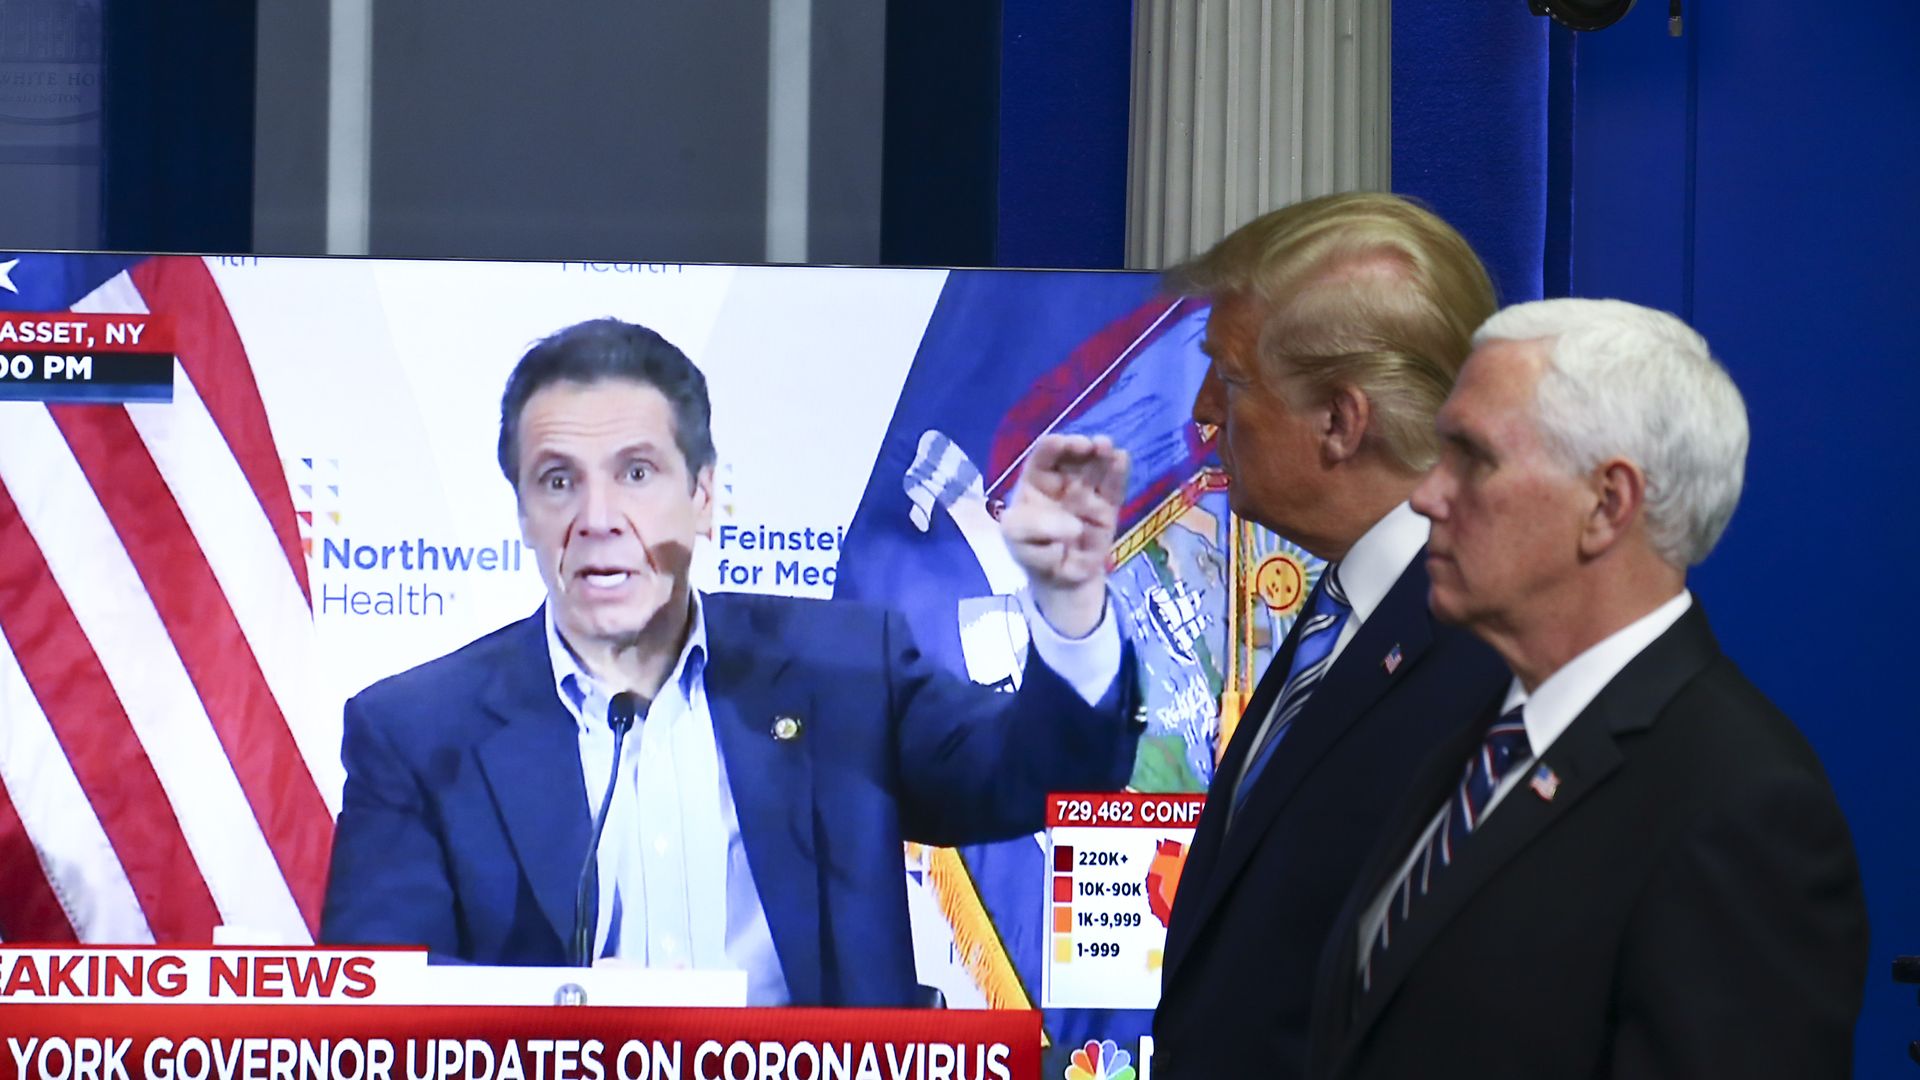 President Trump and Vice President Mike Pence are seen walking by a TV showing a COVID-19 press briefing by New York Gov. Andrew Cuomo.